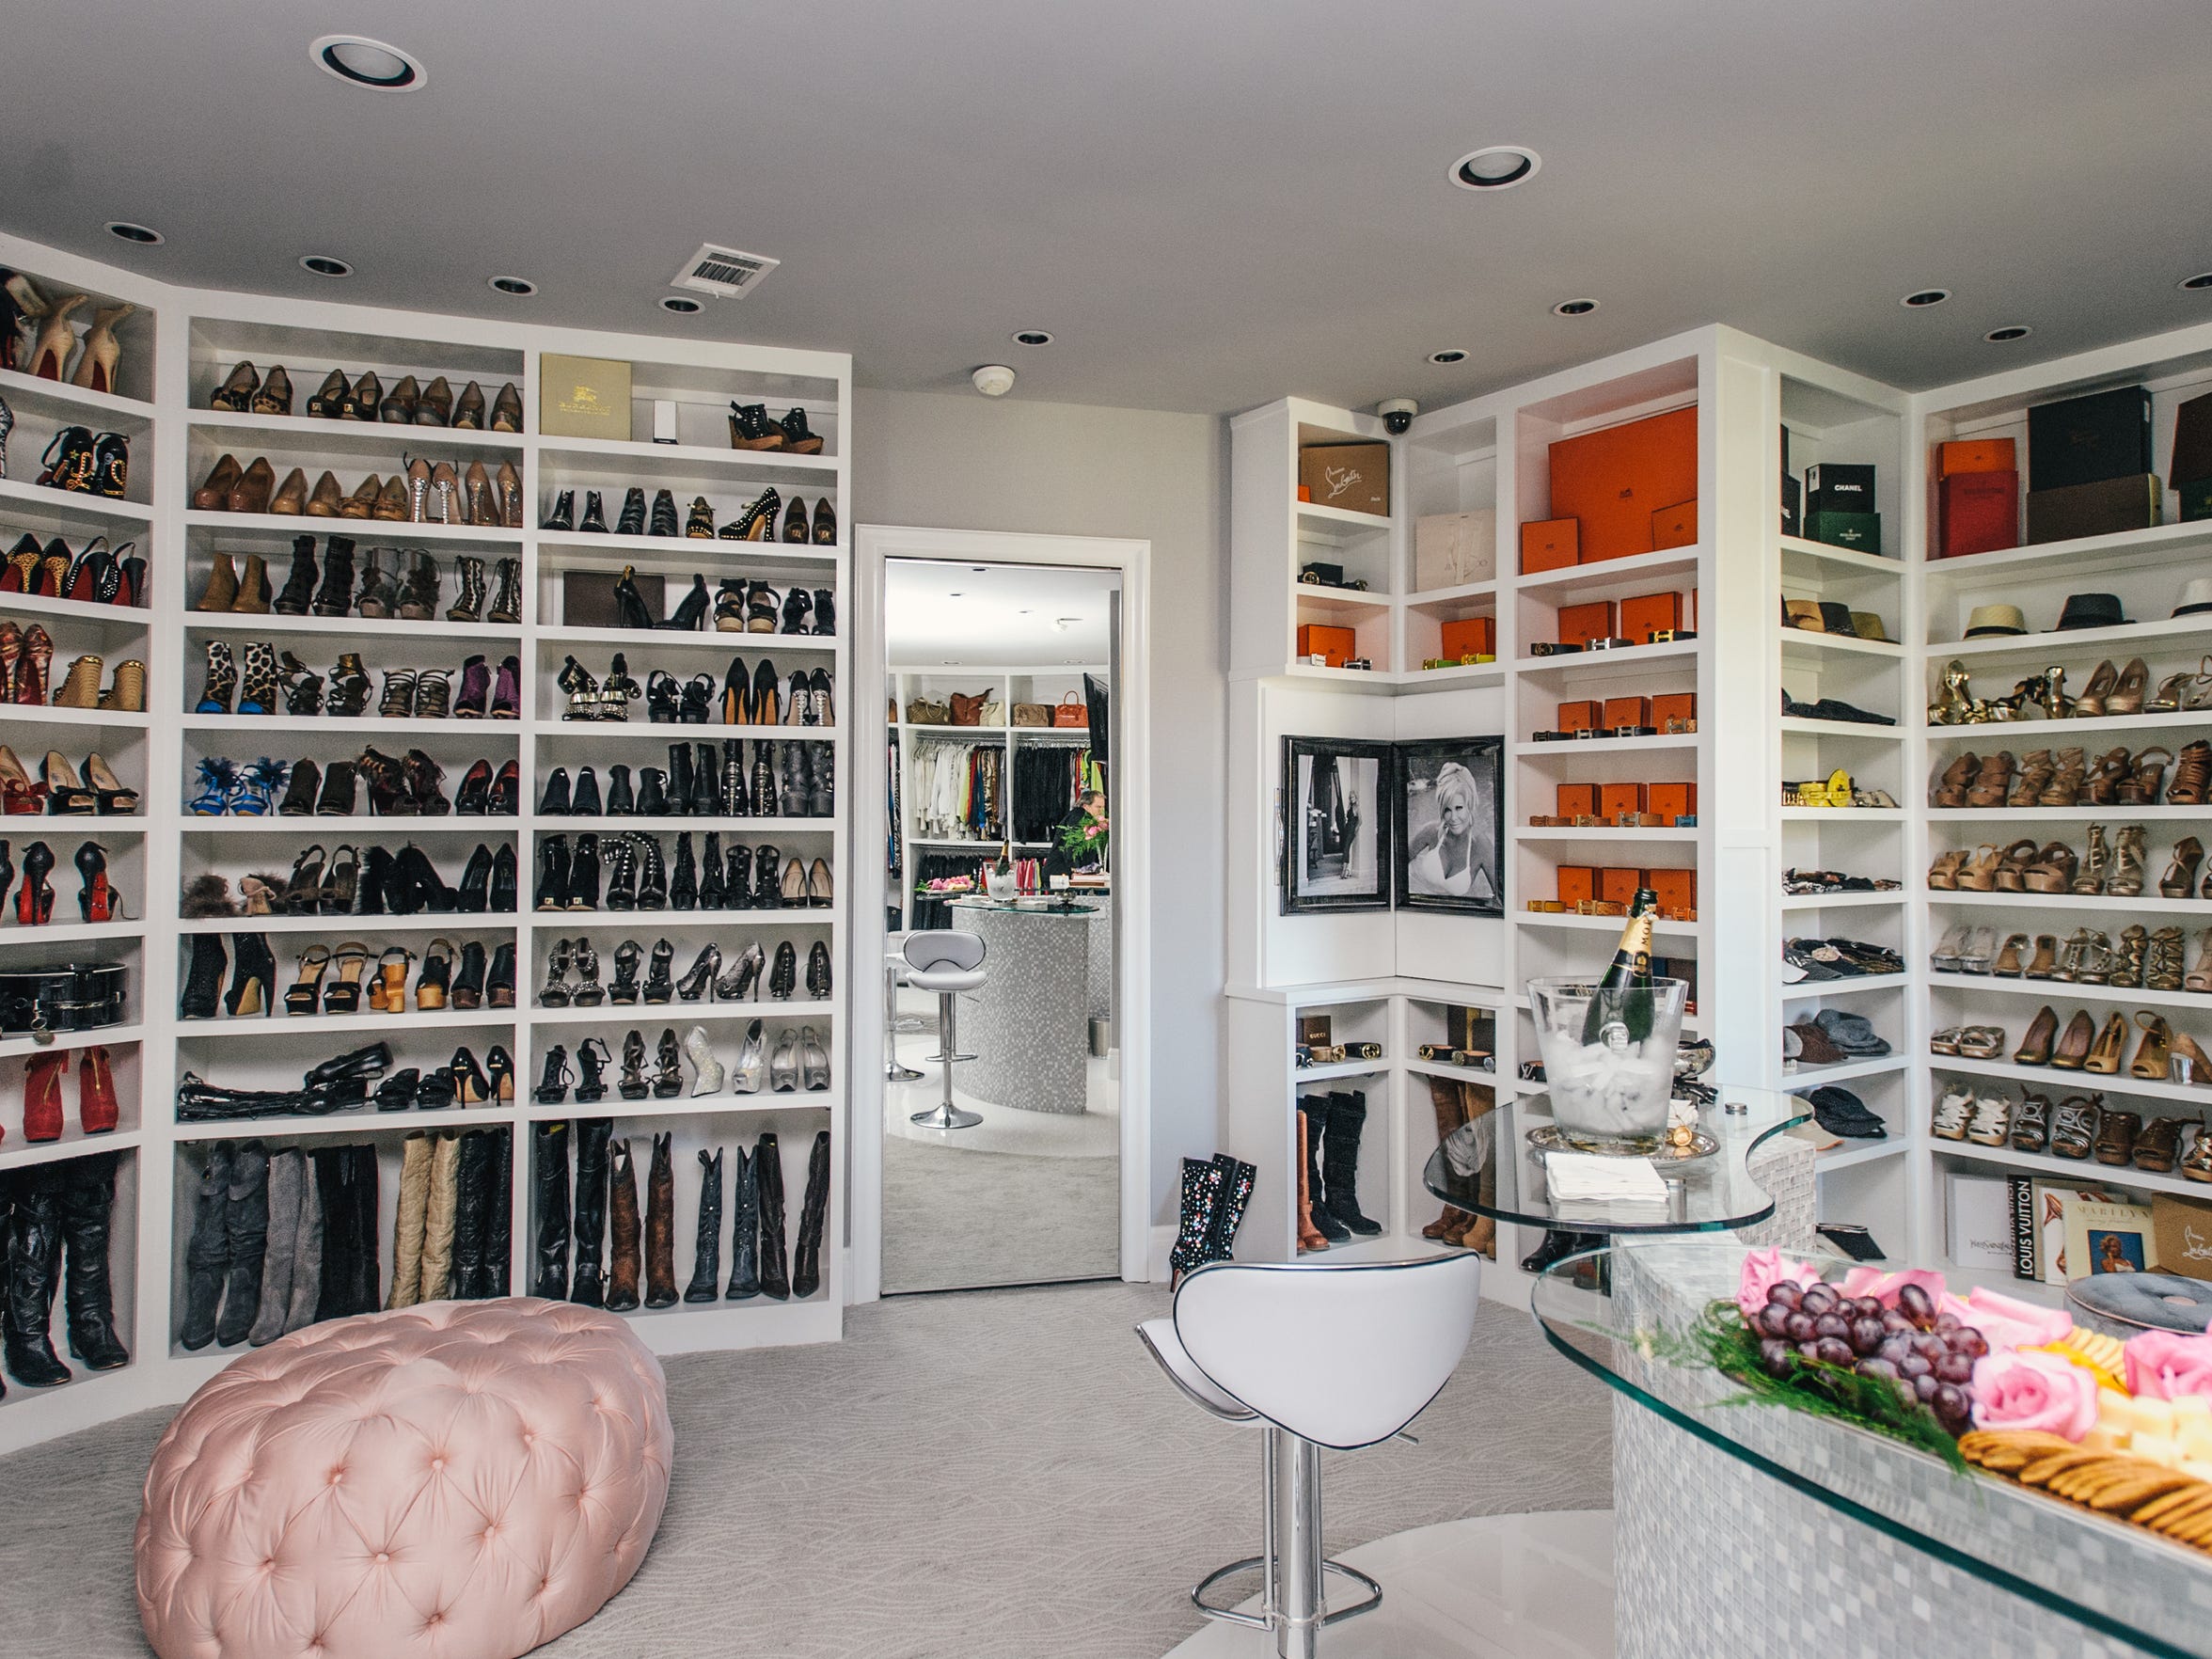 Taking A Walk Into The World's Biggest Closet